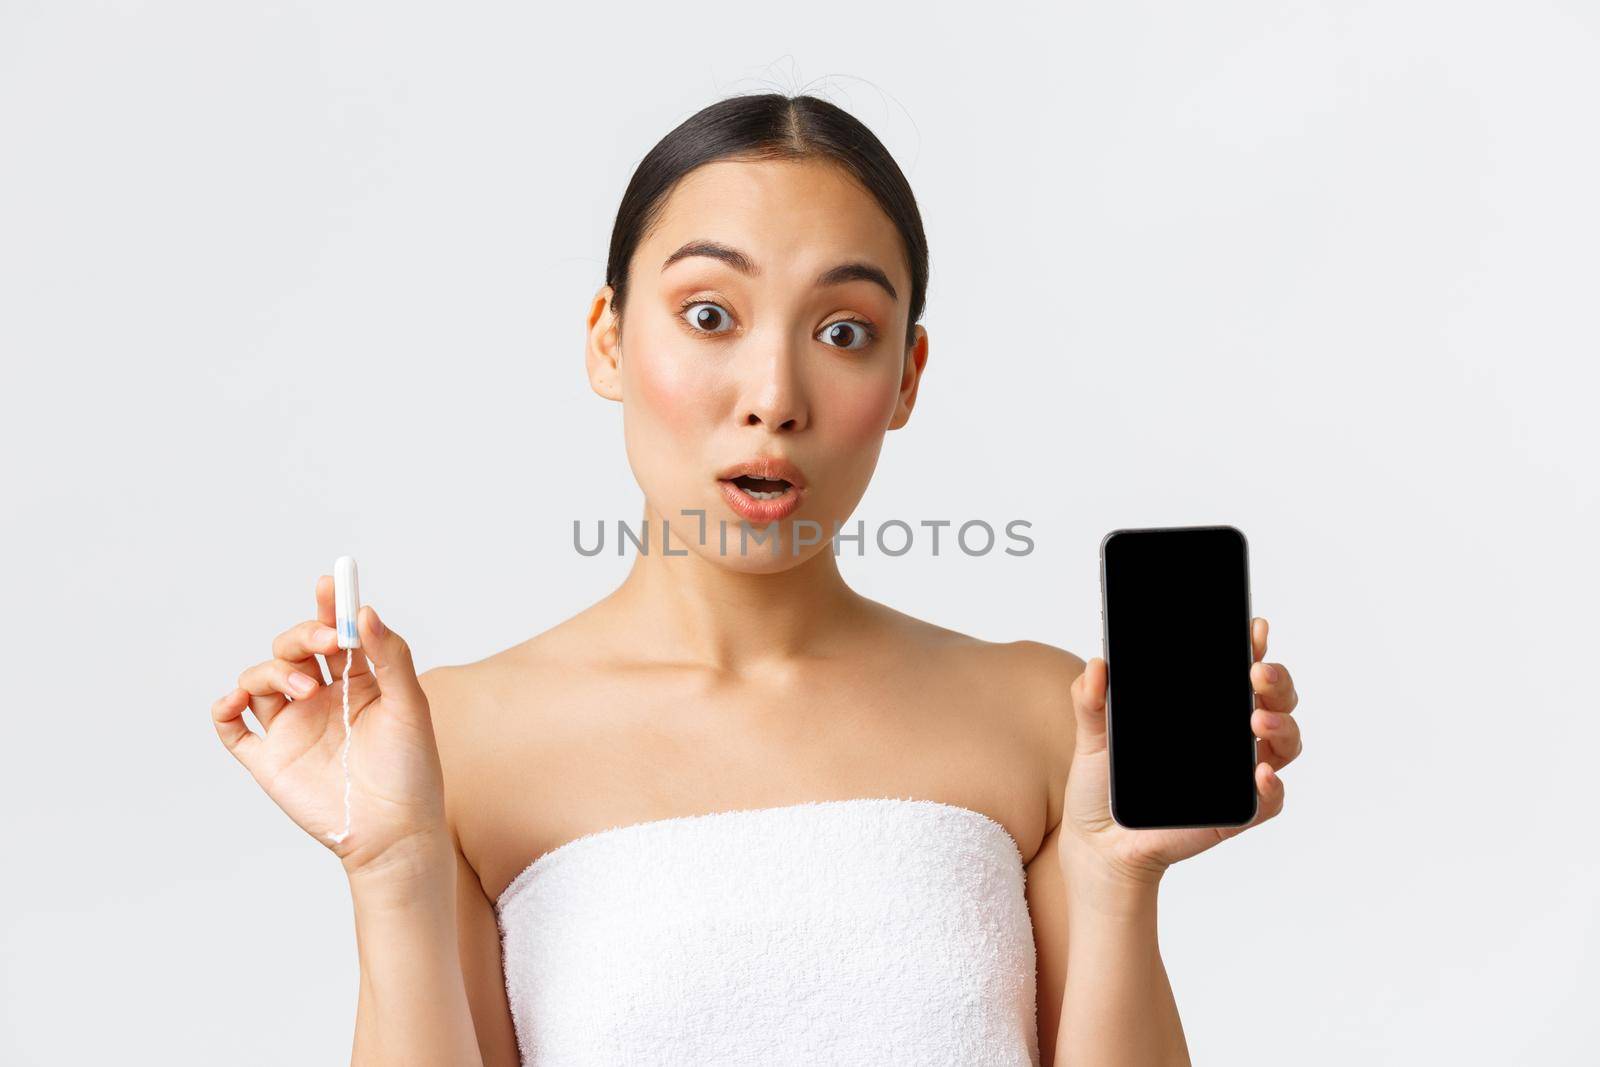 Beauty, personal and intimate care, mobile application concept. Surprised and fascinated asian girl in towel showing tampon and smartphone app for menstrual flow, cycle tracker, white background.